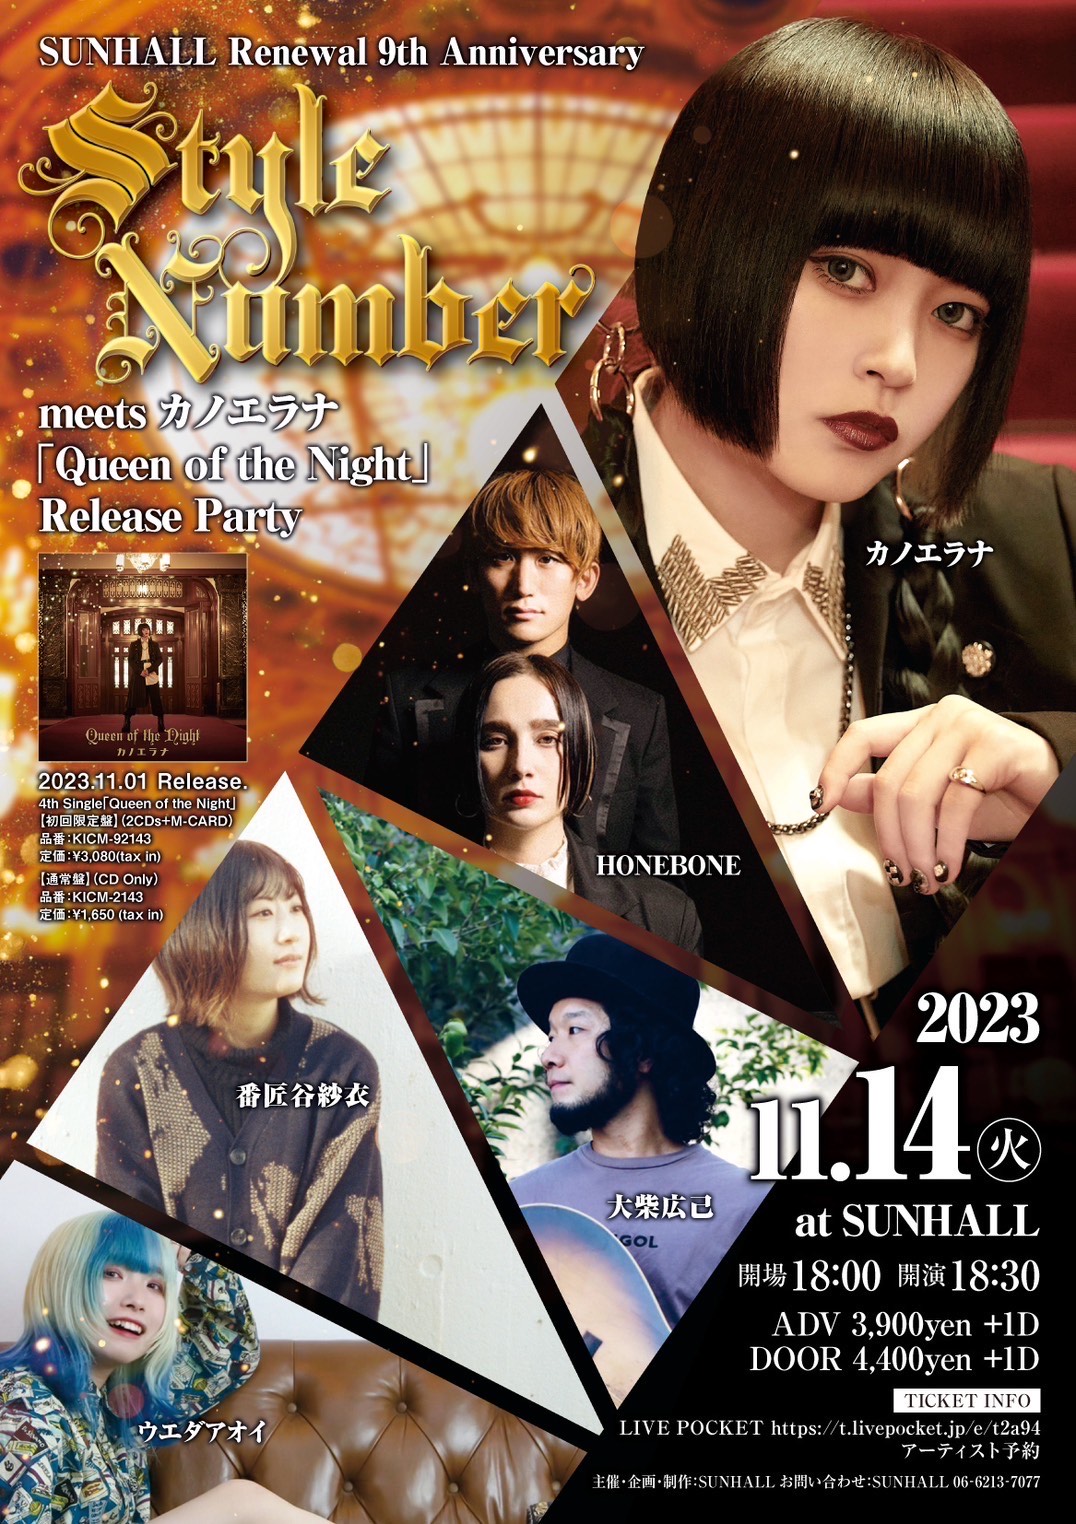 SUNHALL Renewal 9thAnniversary　STYLE NUMBER meets カノエラナ「Queen of the Night」Release Party